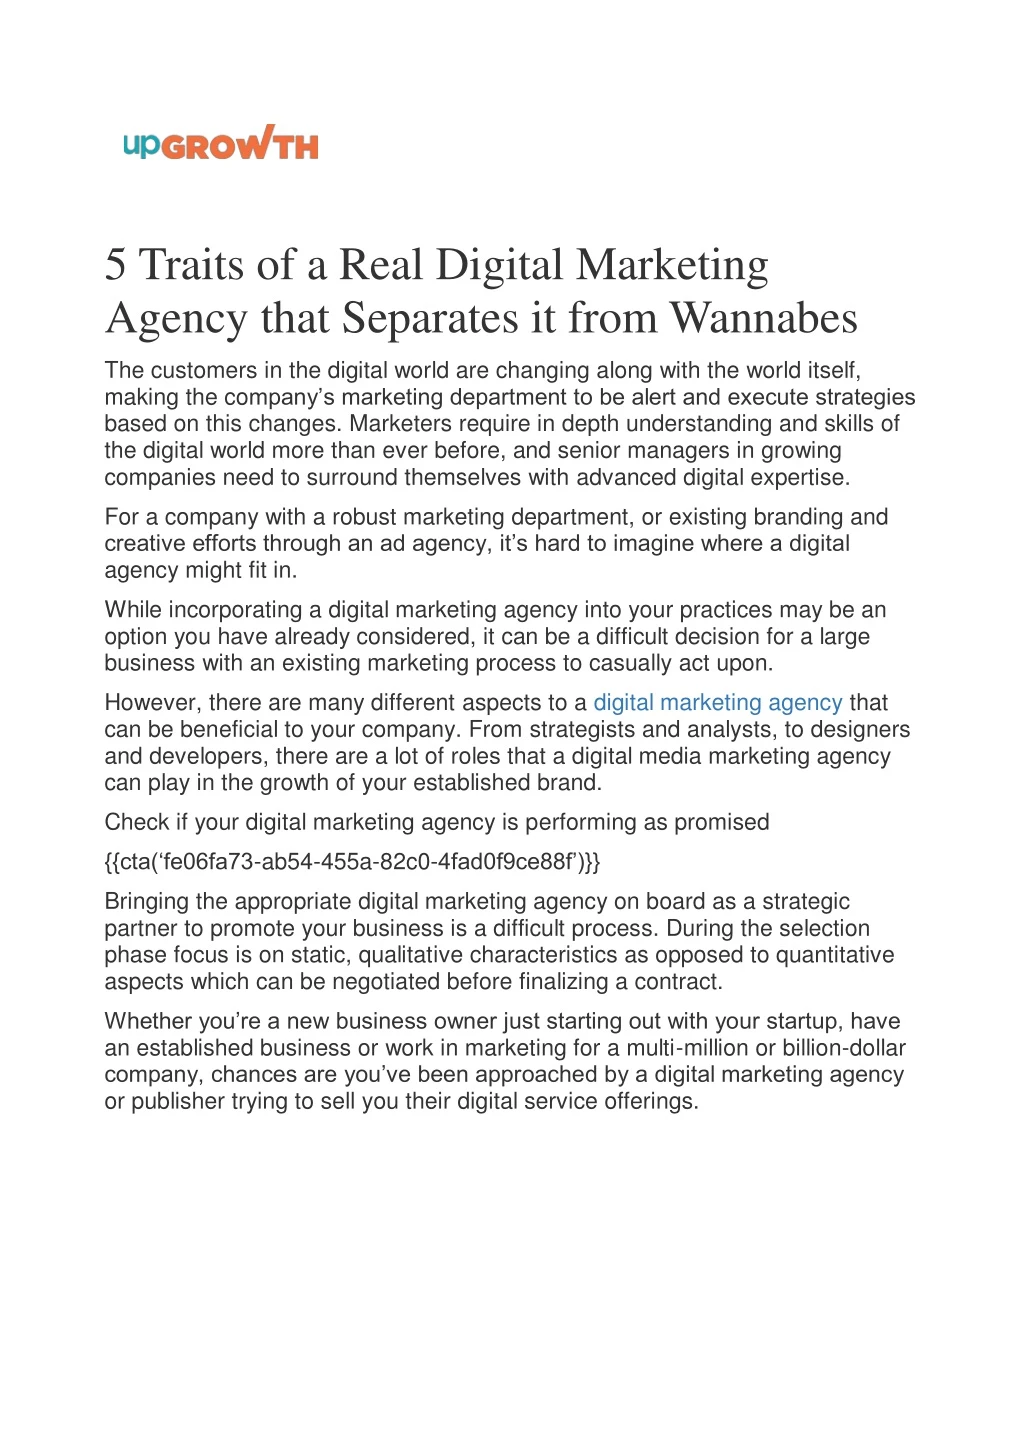 5 traits of a real digital marketing agency that